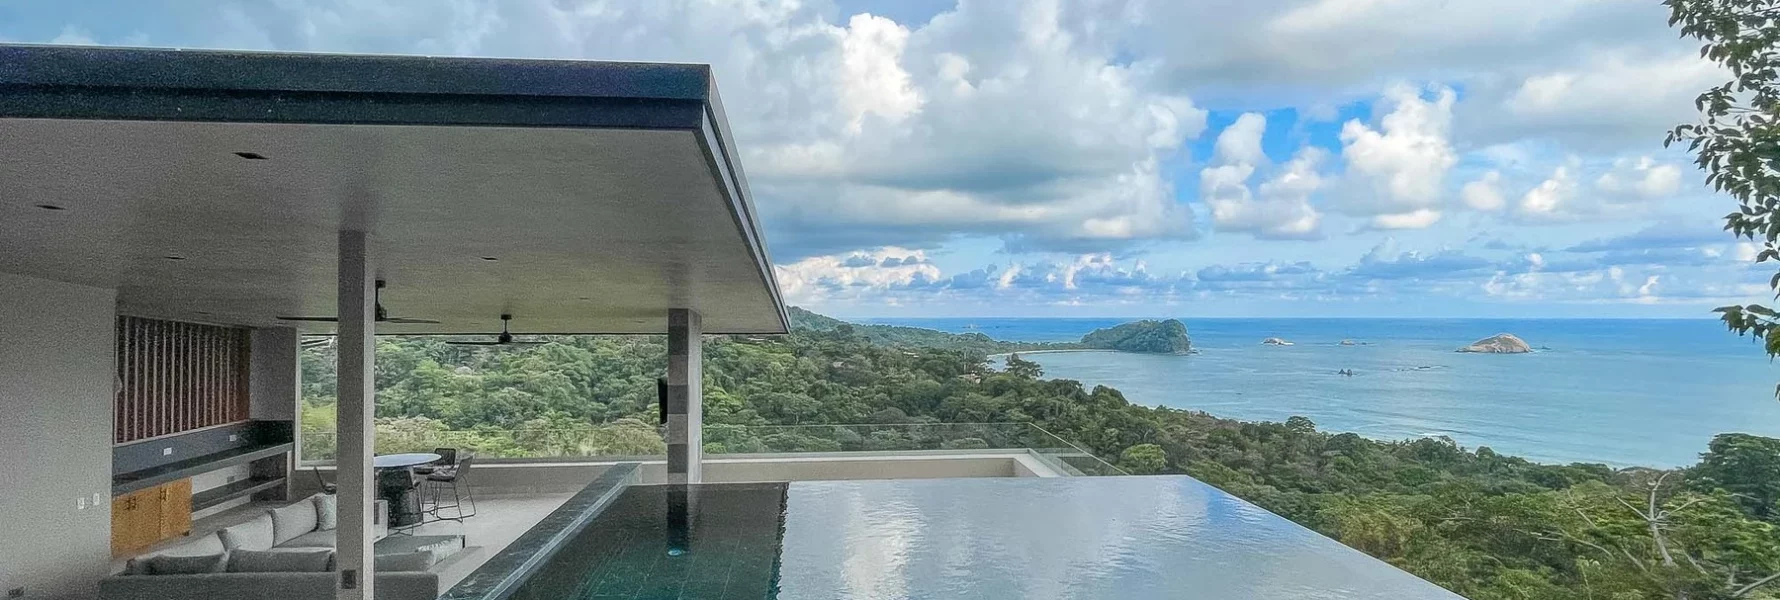 The infinity pool with its beautiful dark green tiling is the ultimate spot in the villa to chill and enjoy the view.